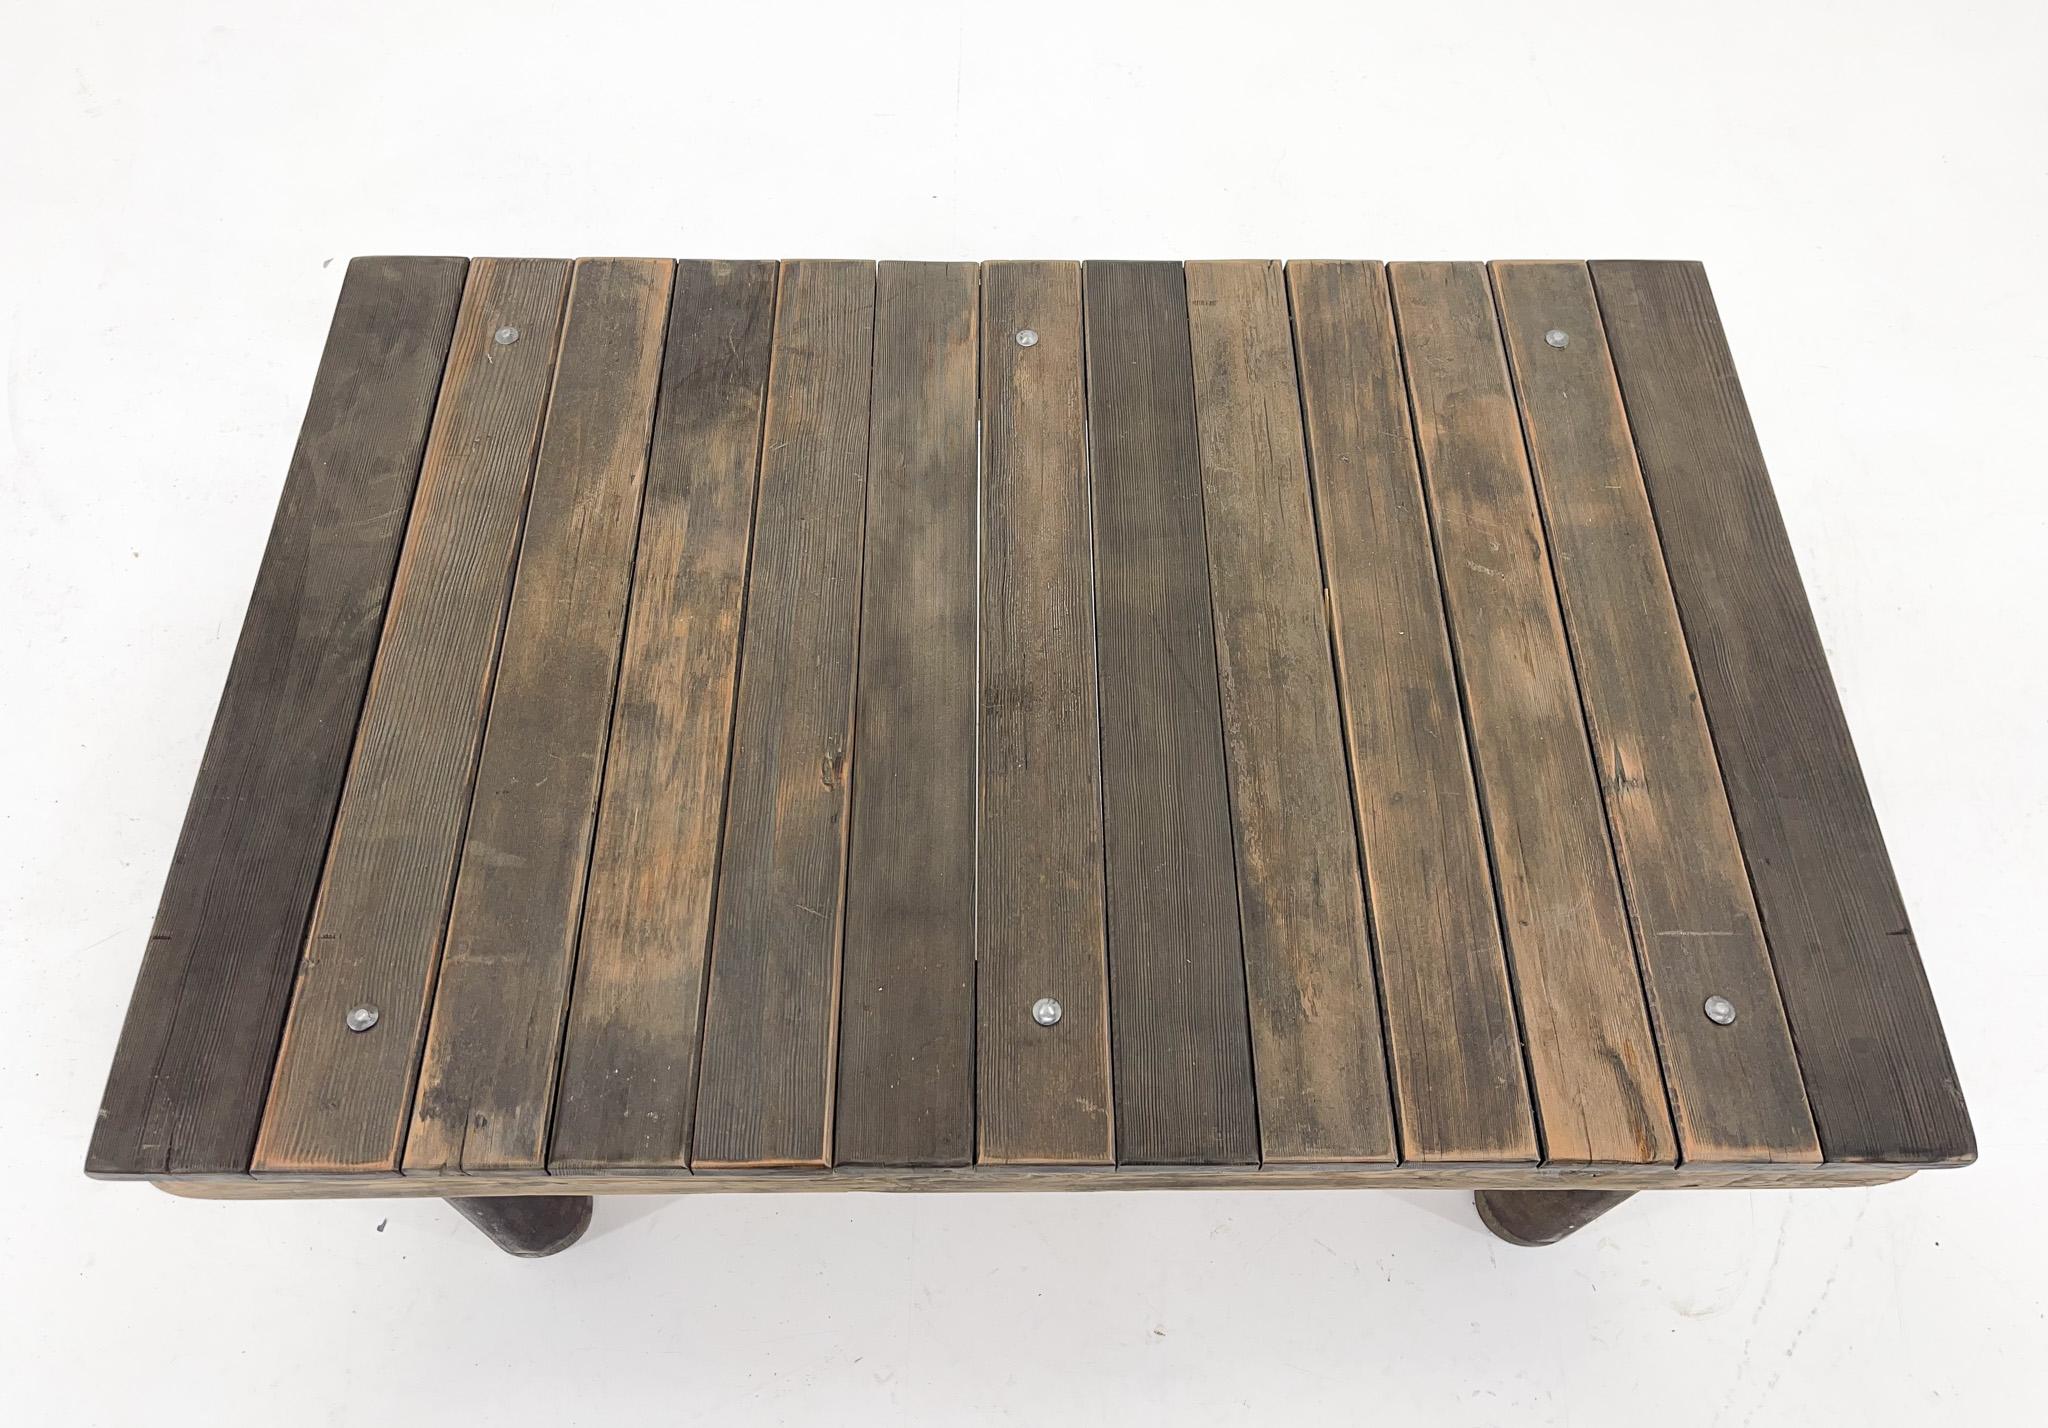 Czech 1950s Vintage Industrial Wood & Iron Coffee Table For Sale